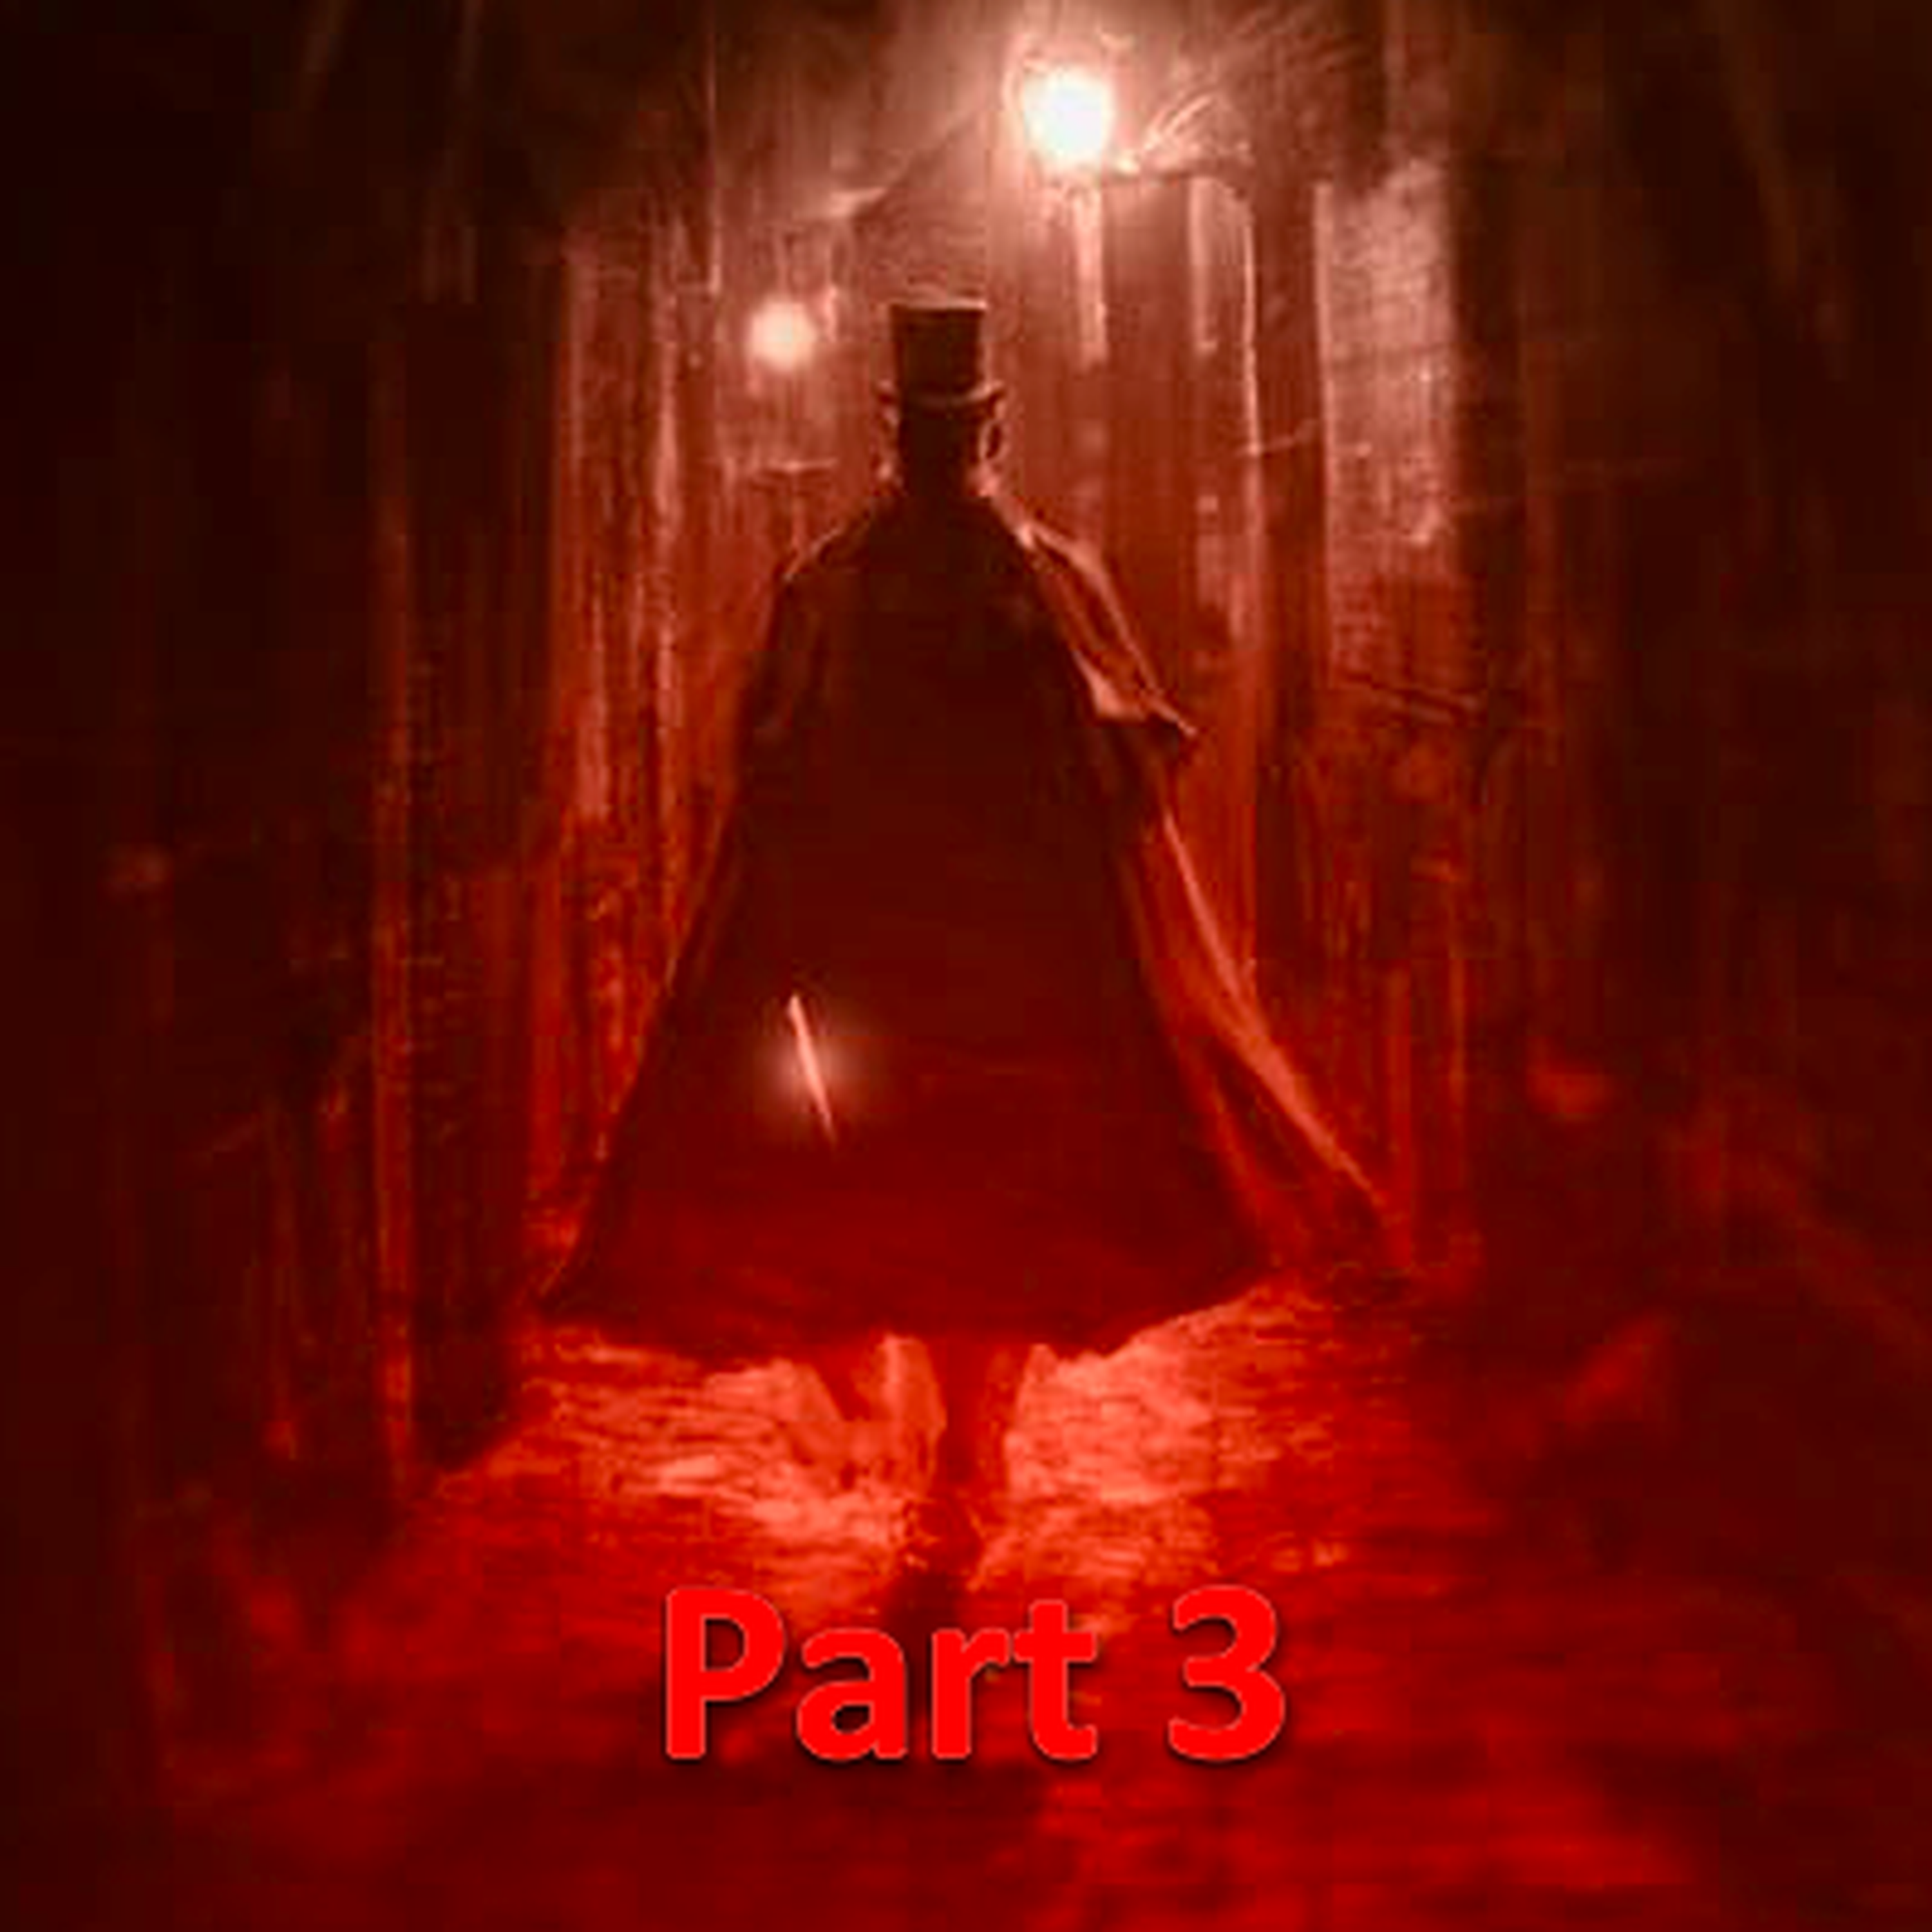 Jack the Ripper - Part 3